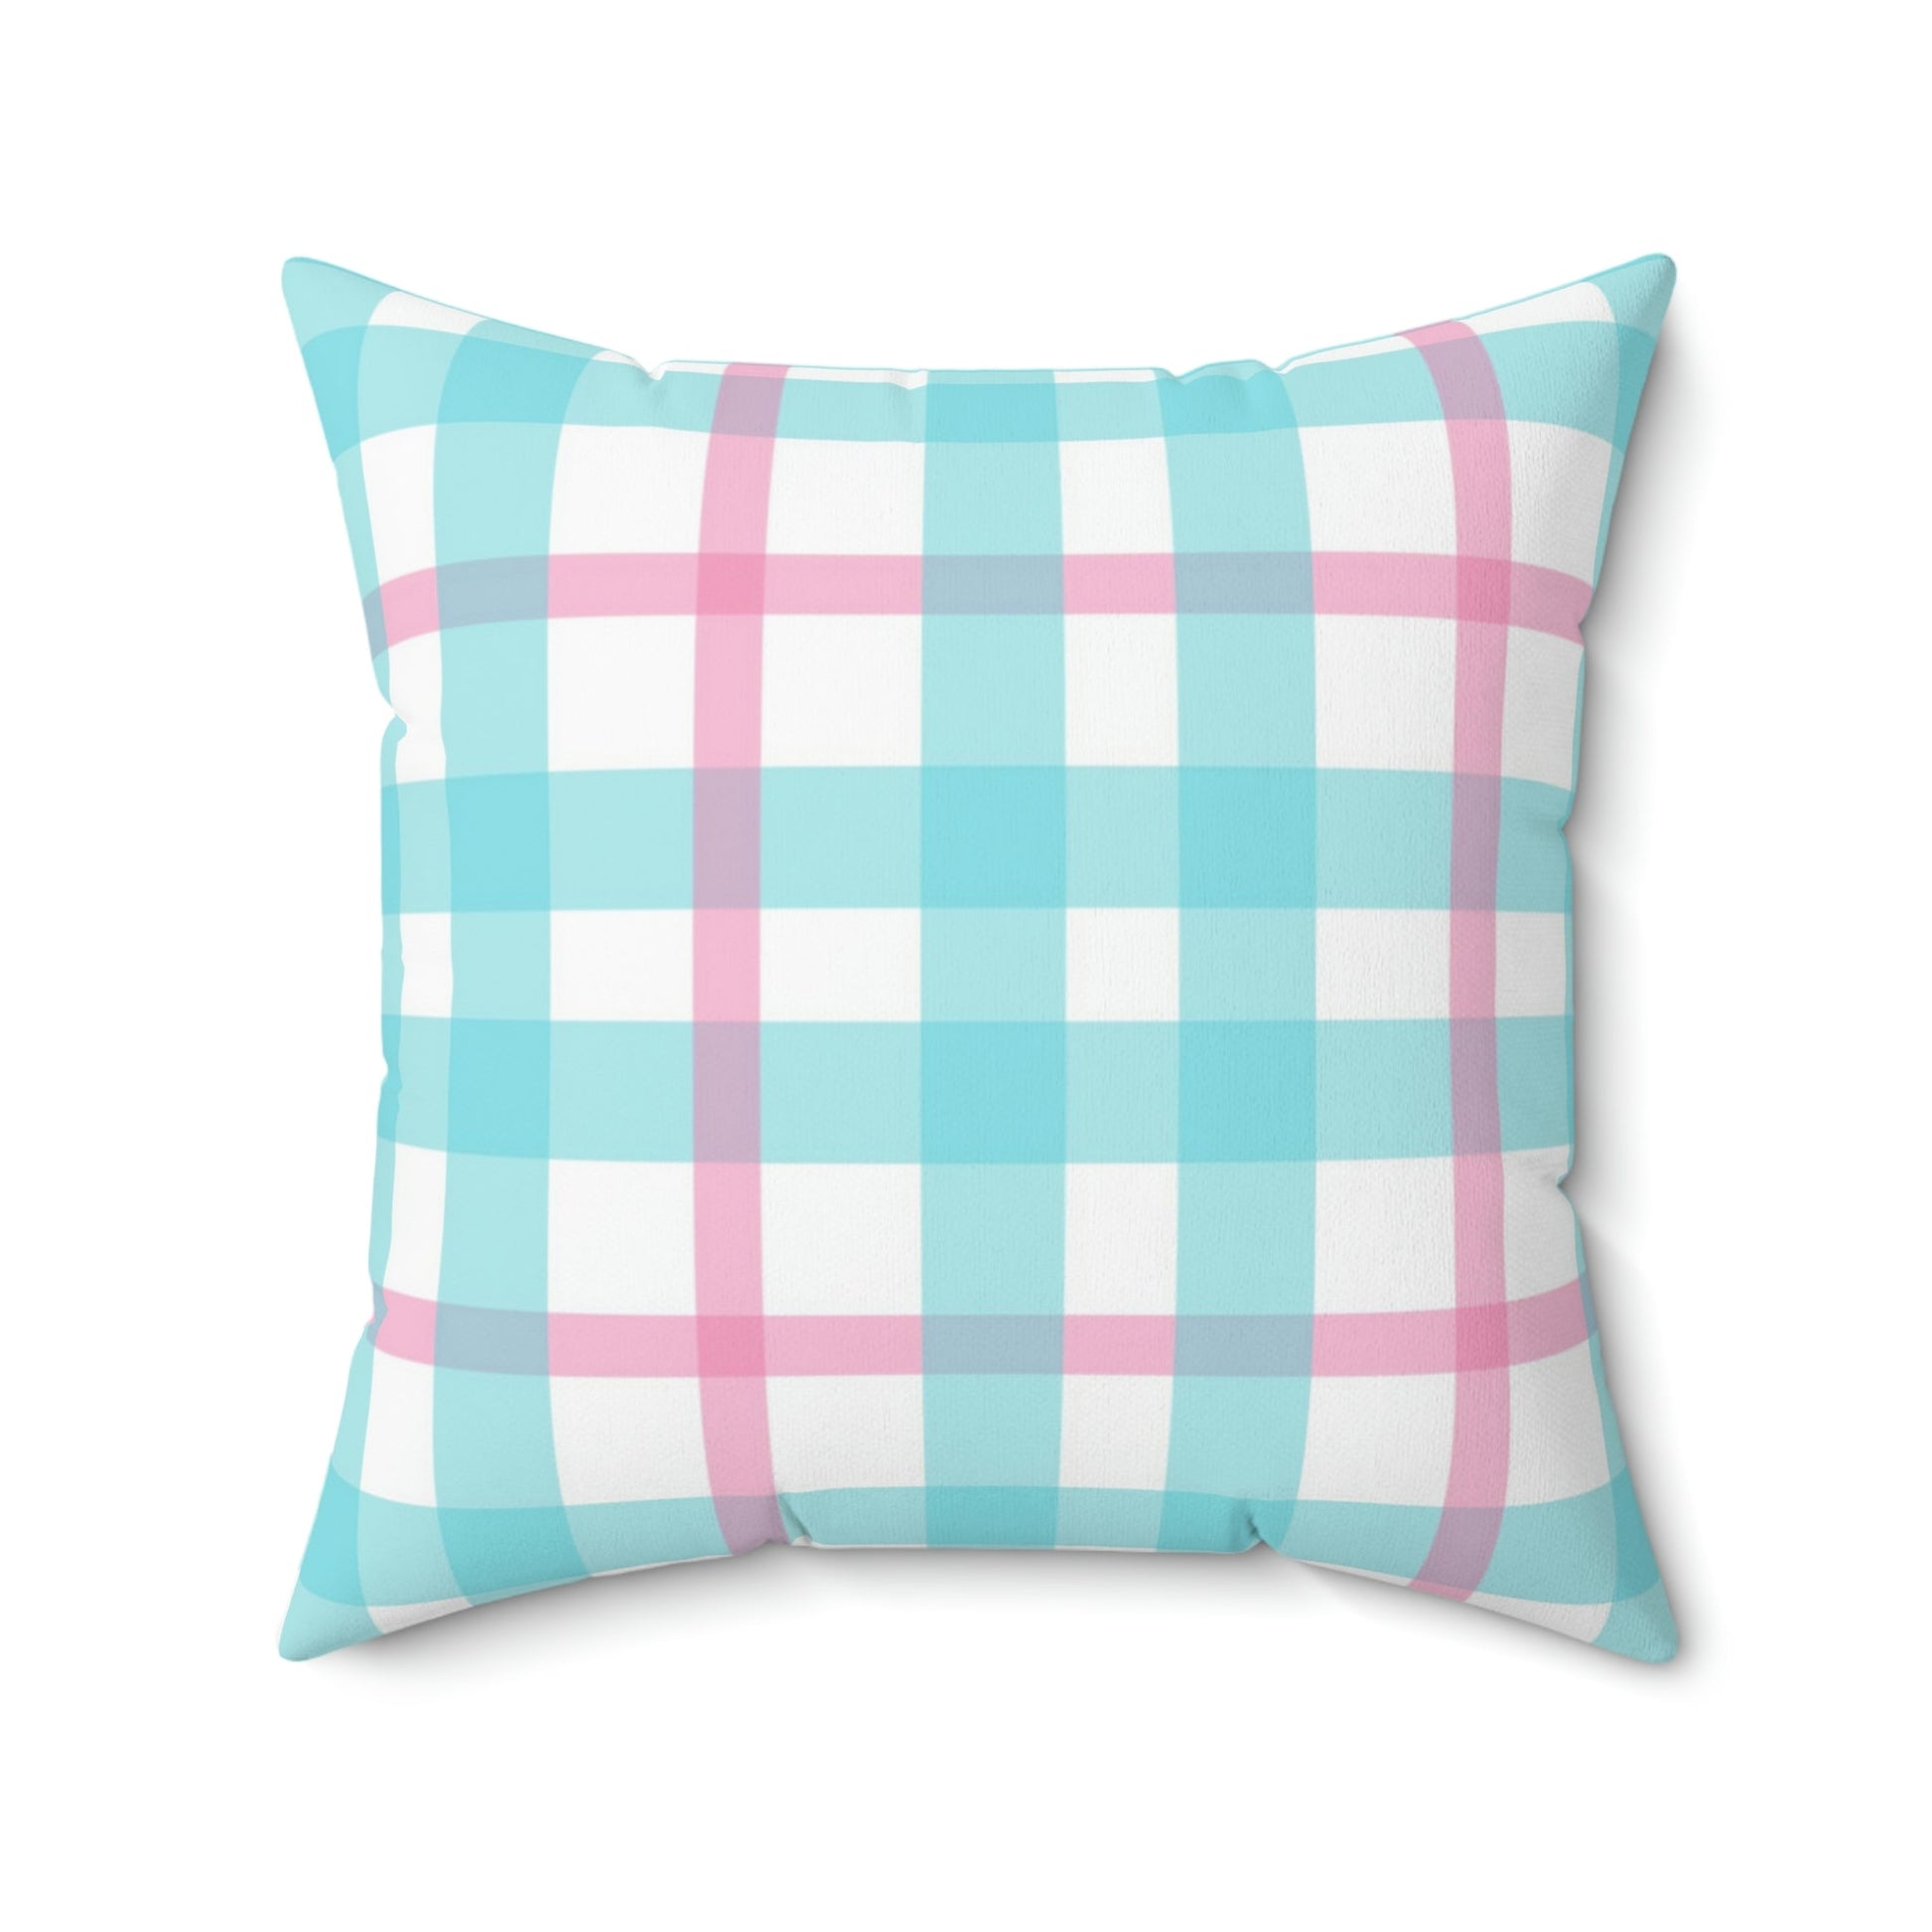 Vibrant Gingham Square Pillow Home Decor Pink Sweetheart